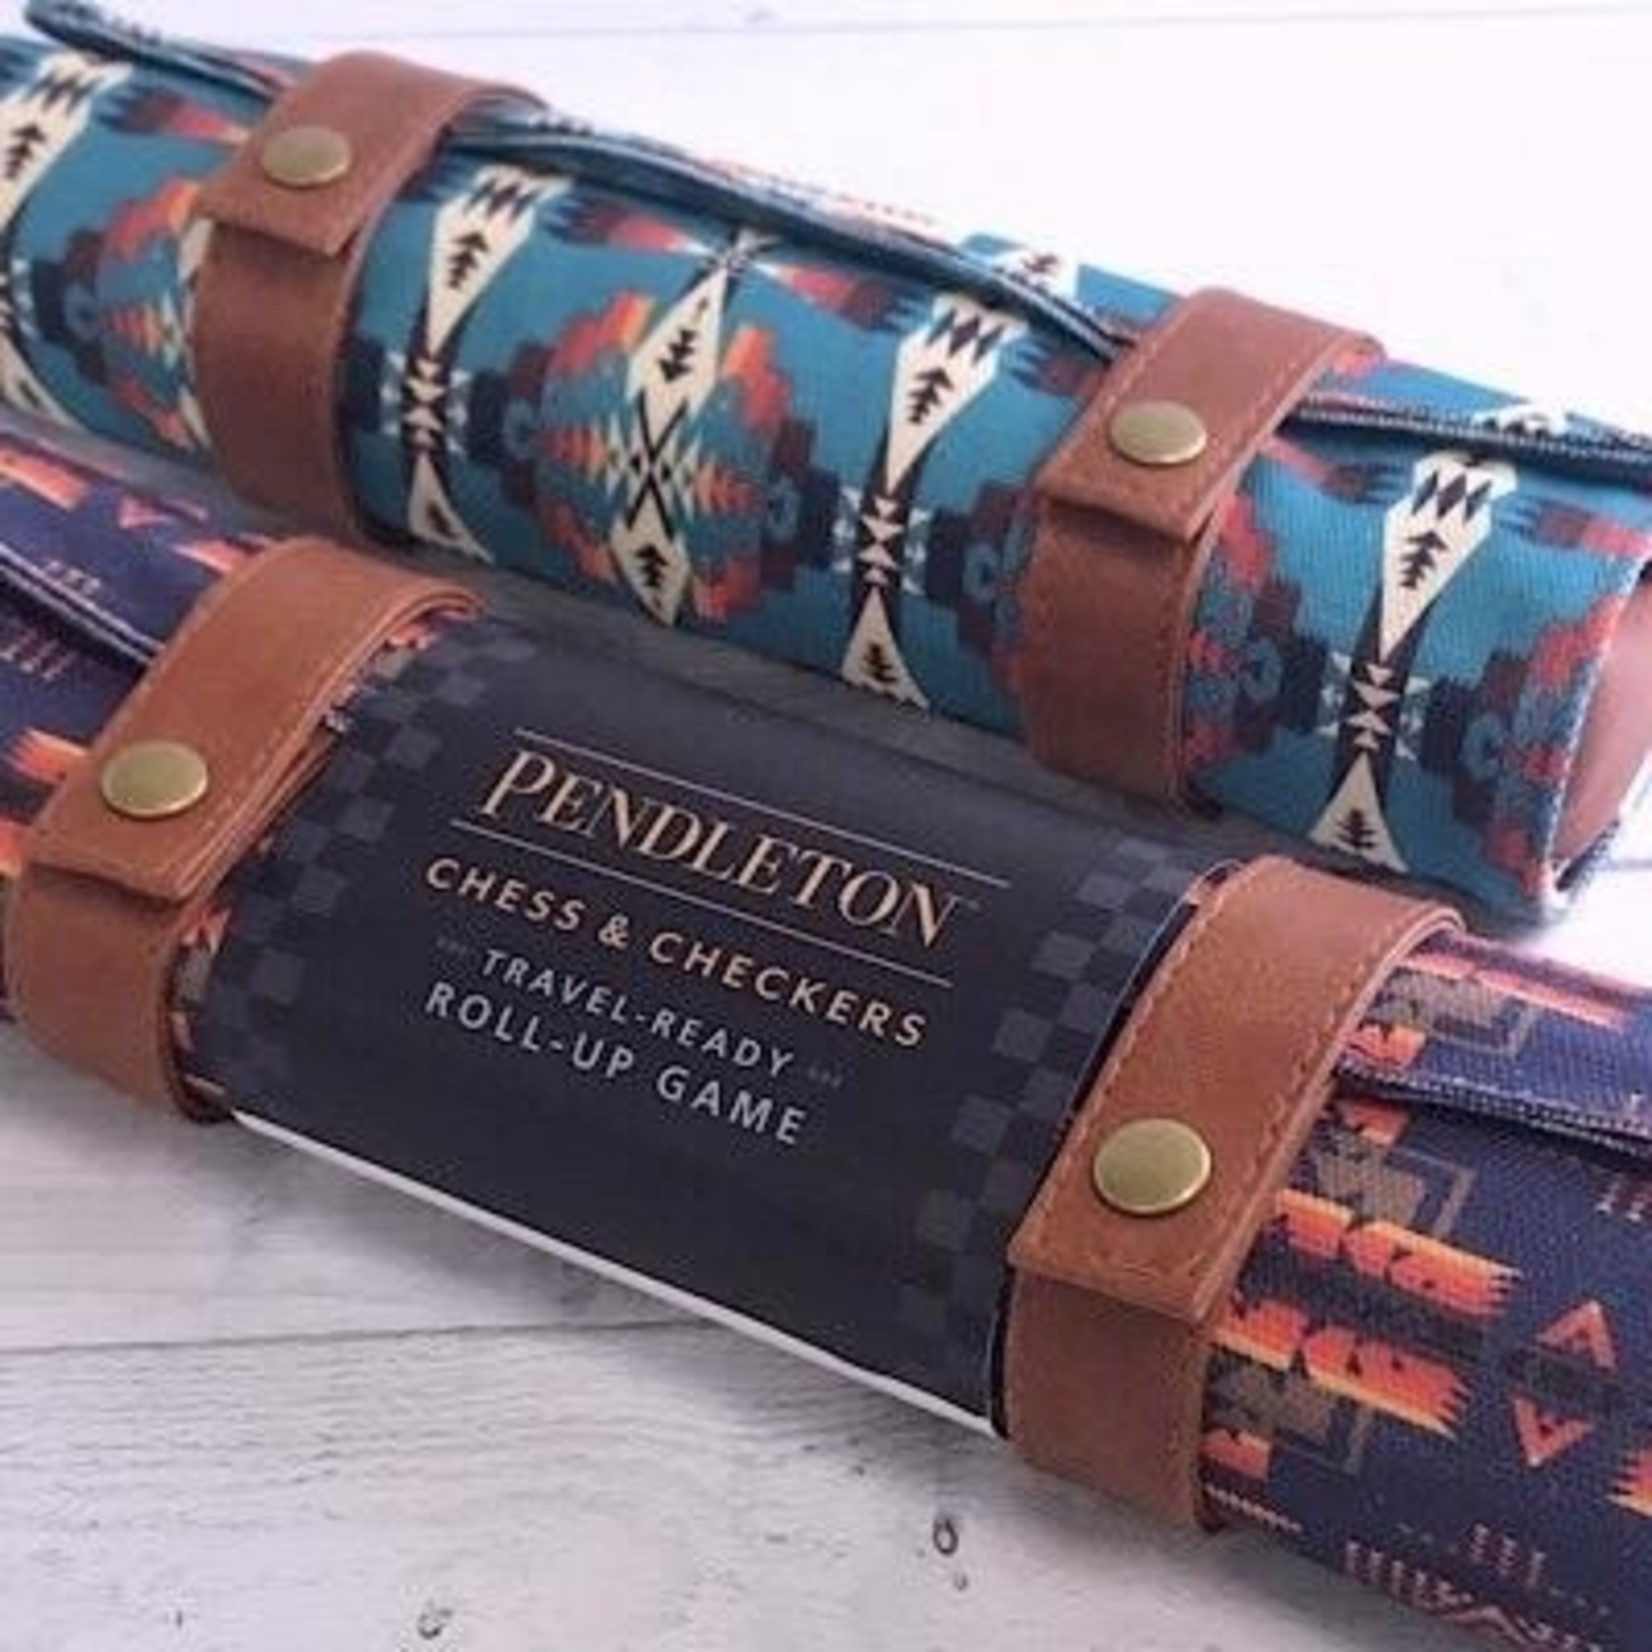 Pendleton Chess & Checkers: Travel-Ready Roll-Up Game